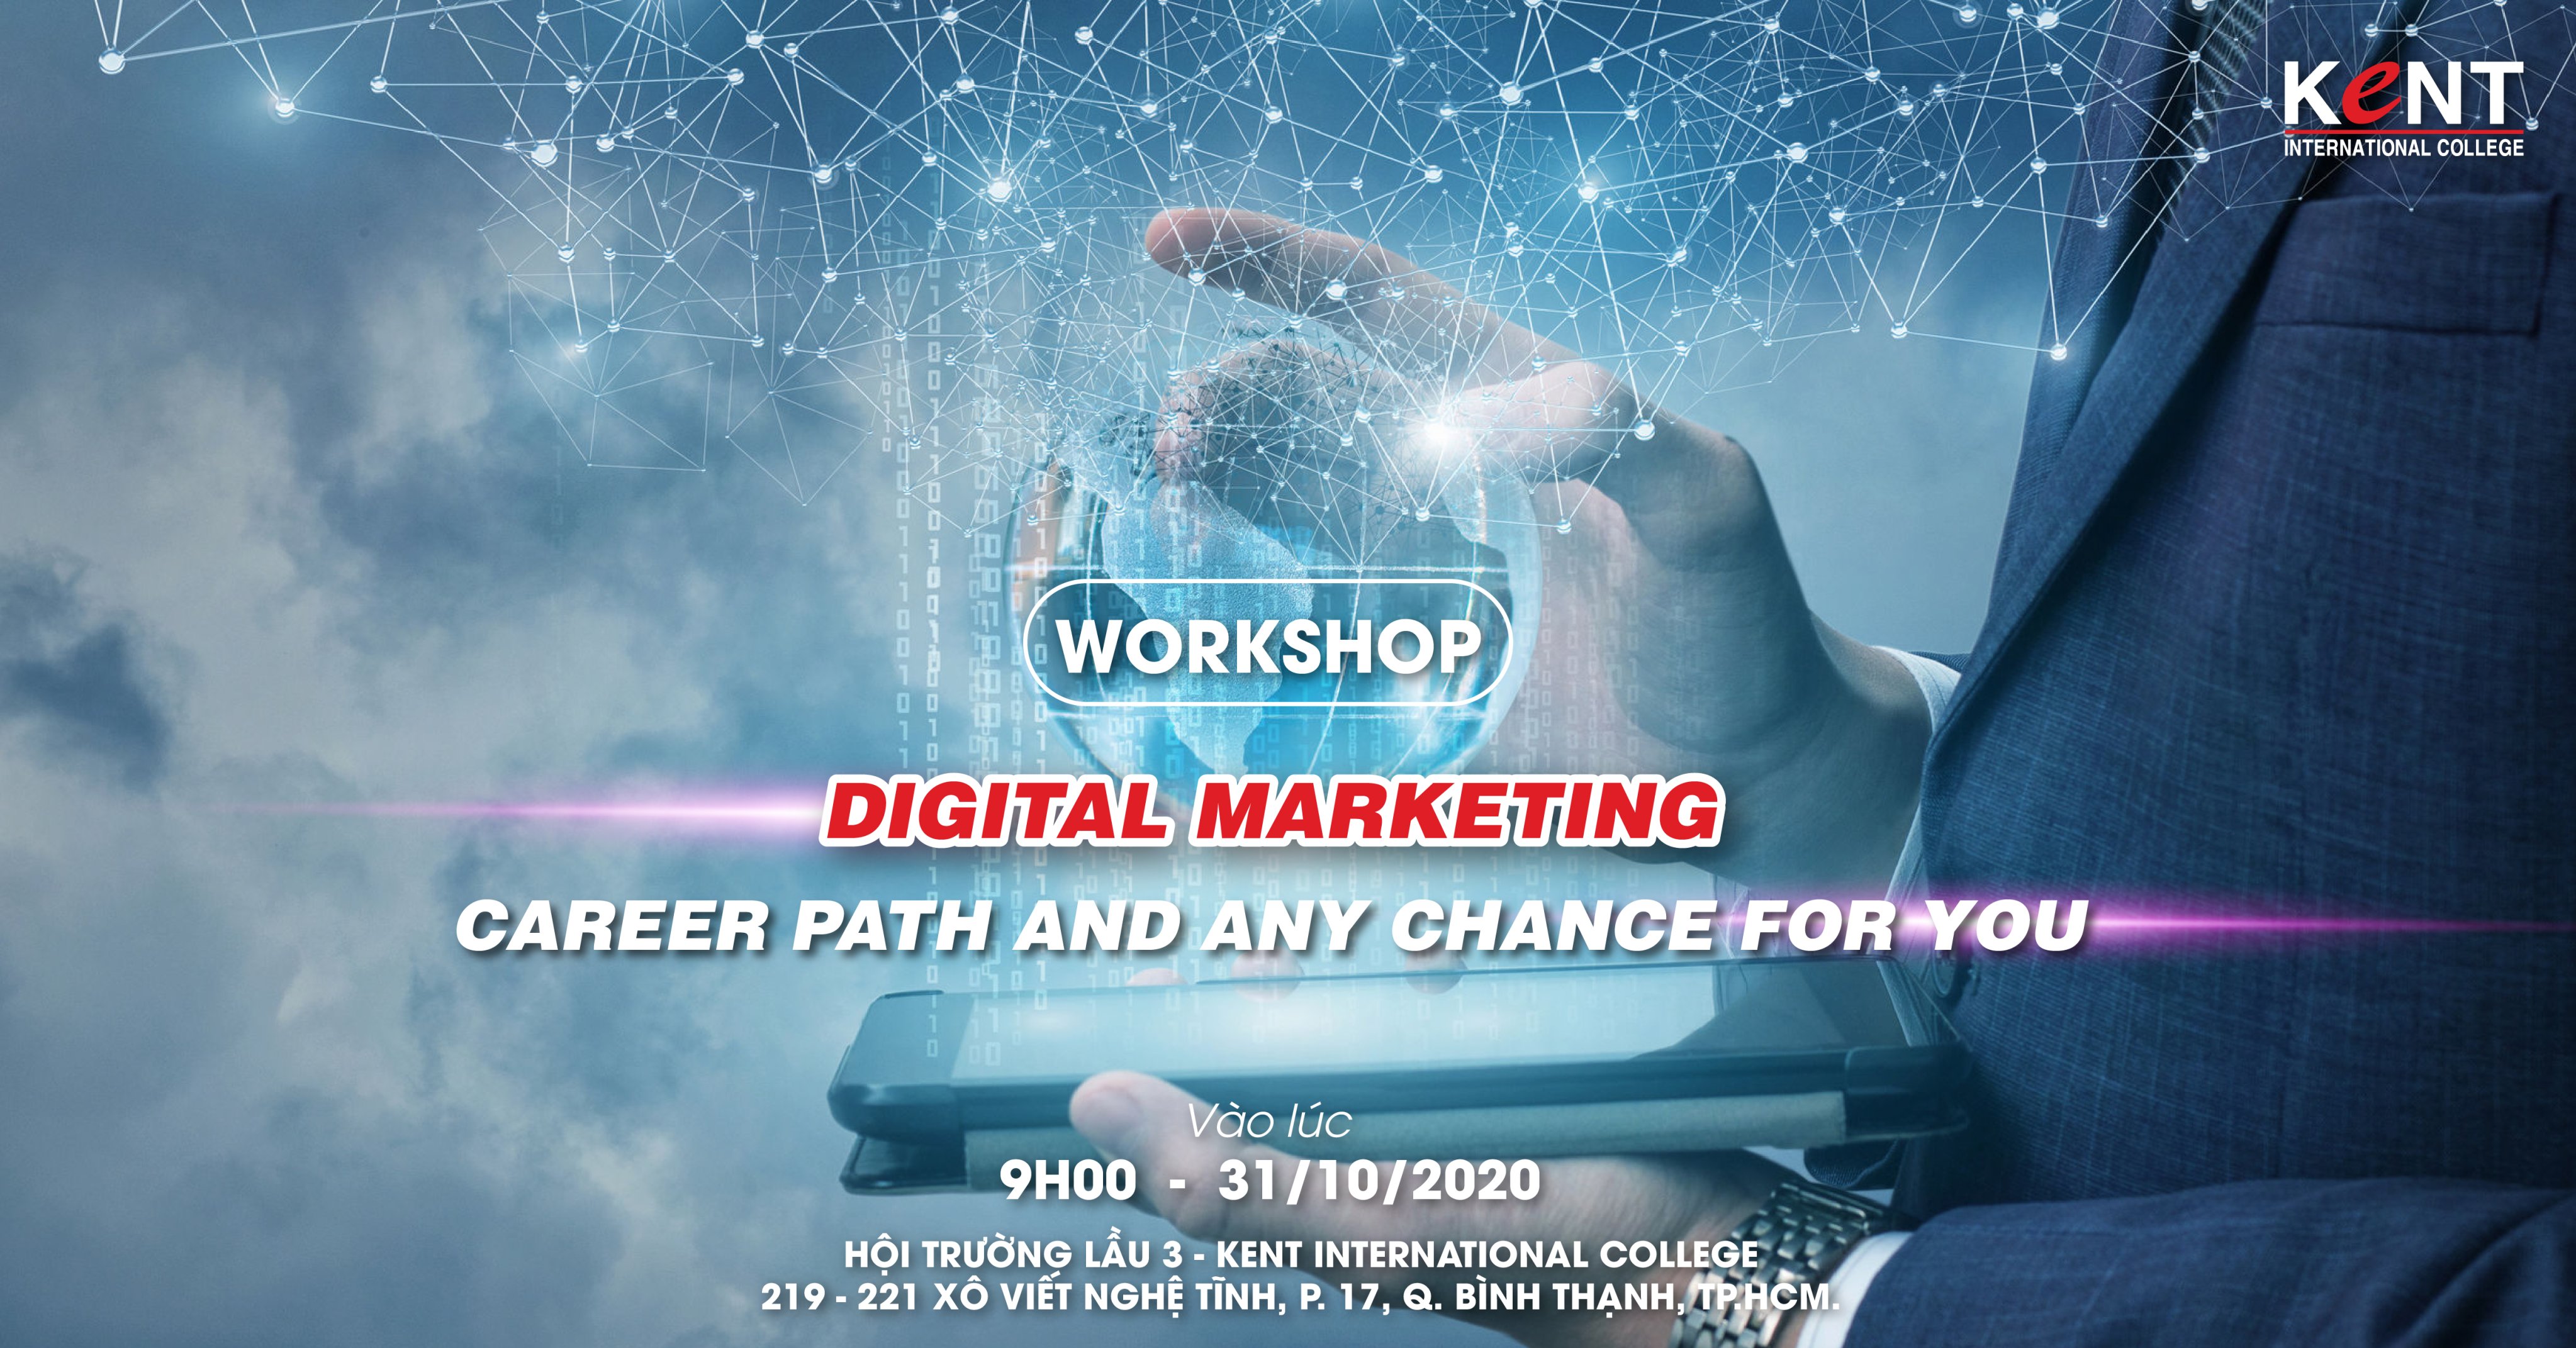 WORKSHOP: DIGITAL MARKETING-CAREER PATH AND ANY CHANCE FOR YOU